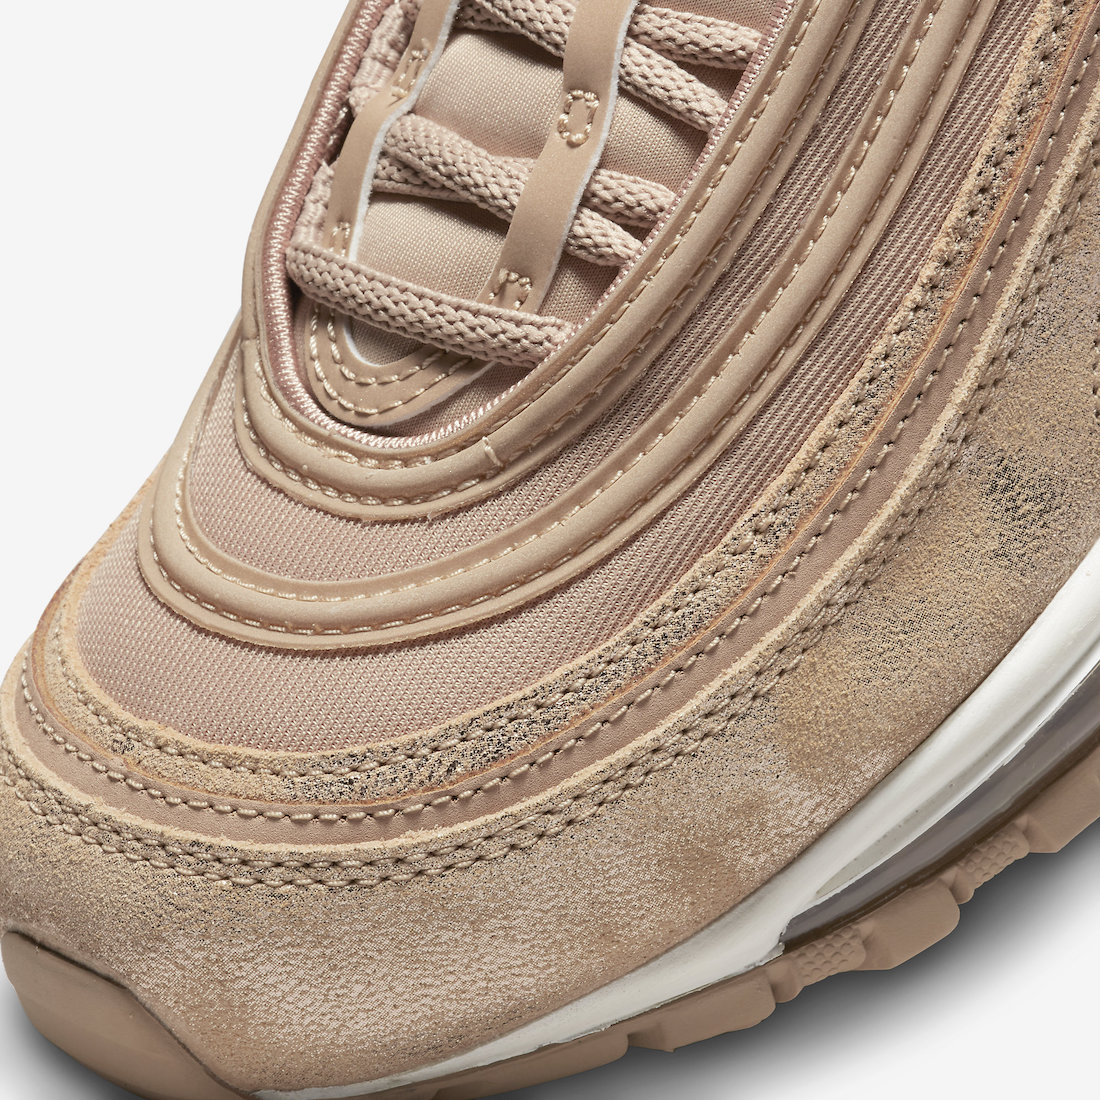 Nike Air Max 97 Distressed Release Date